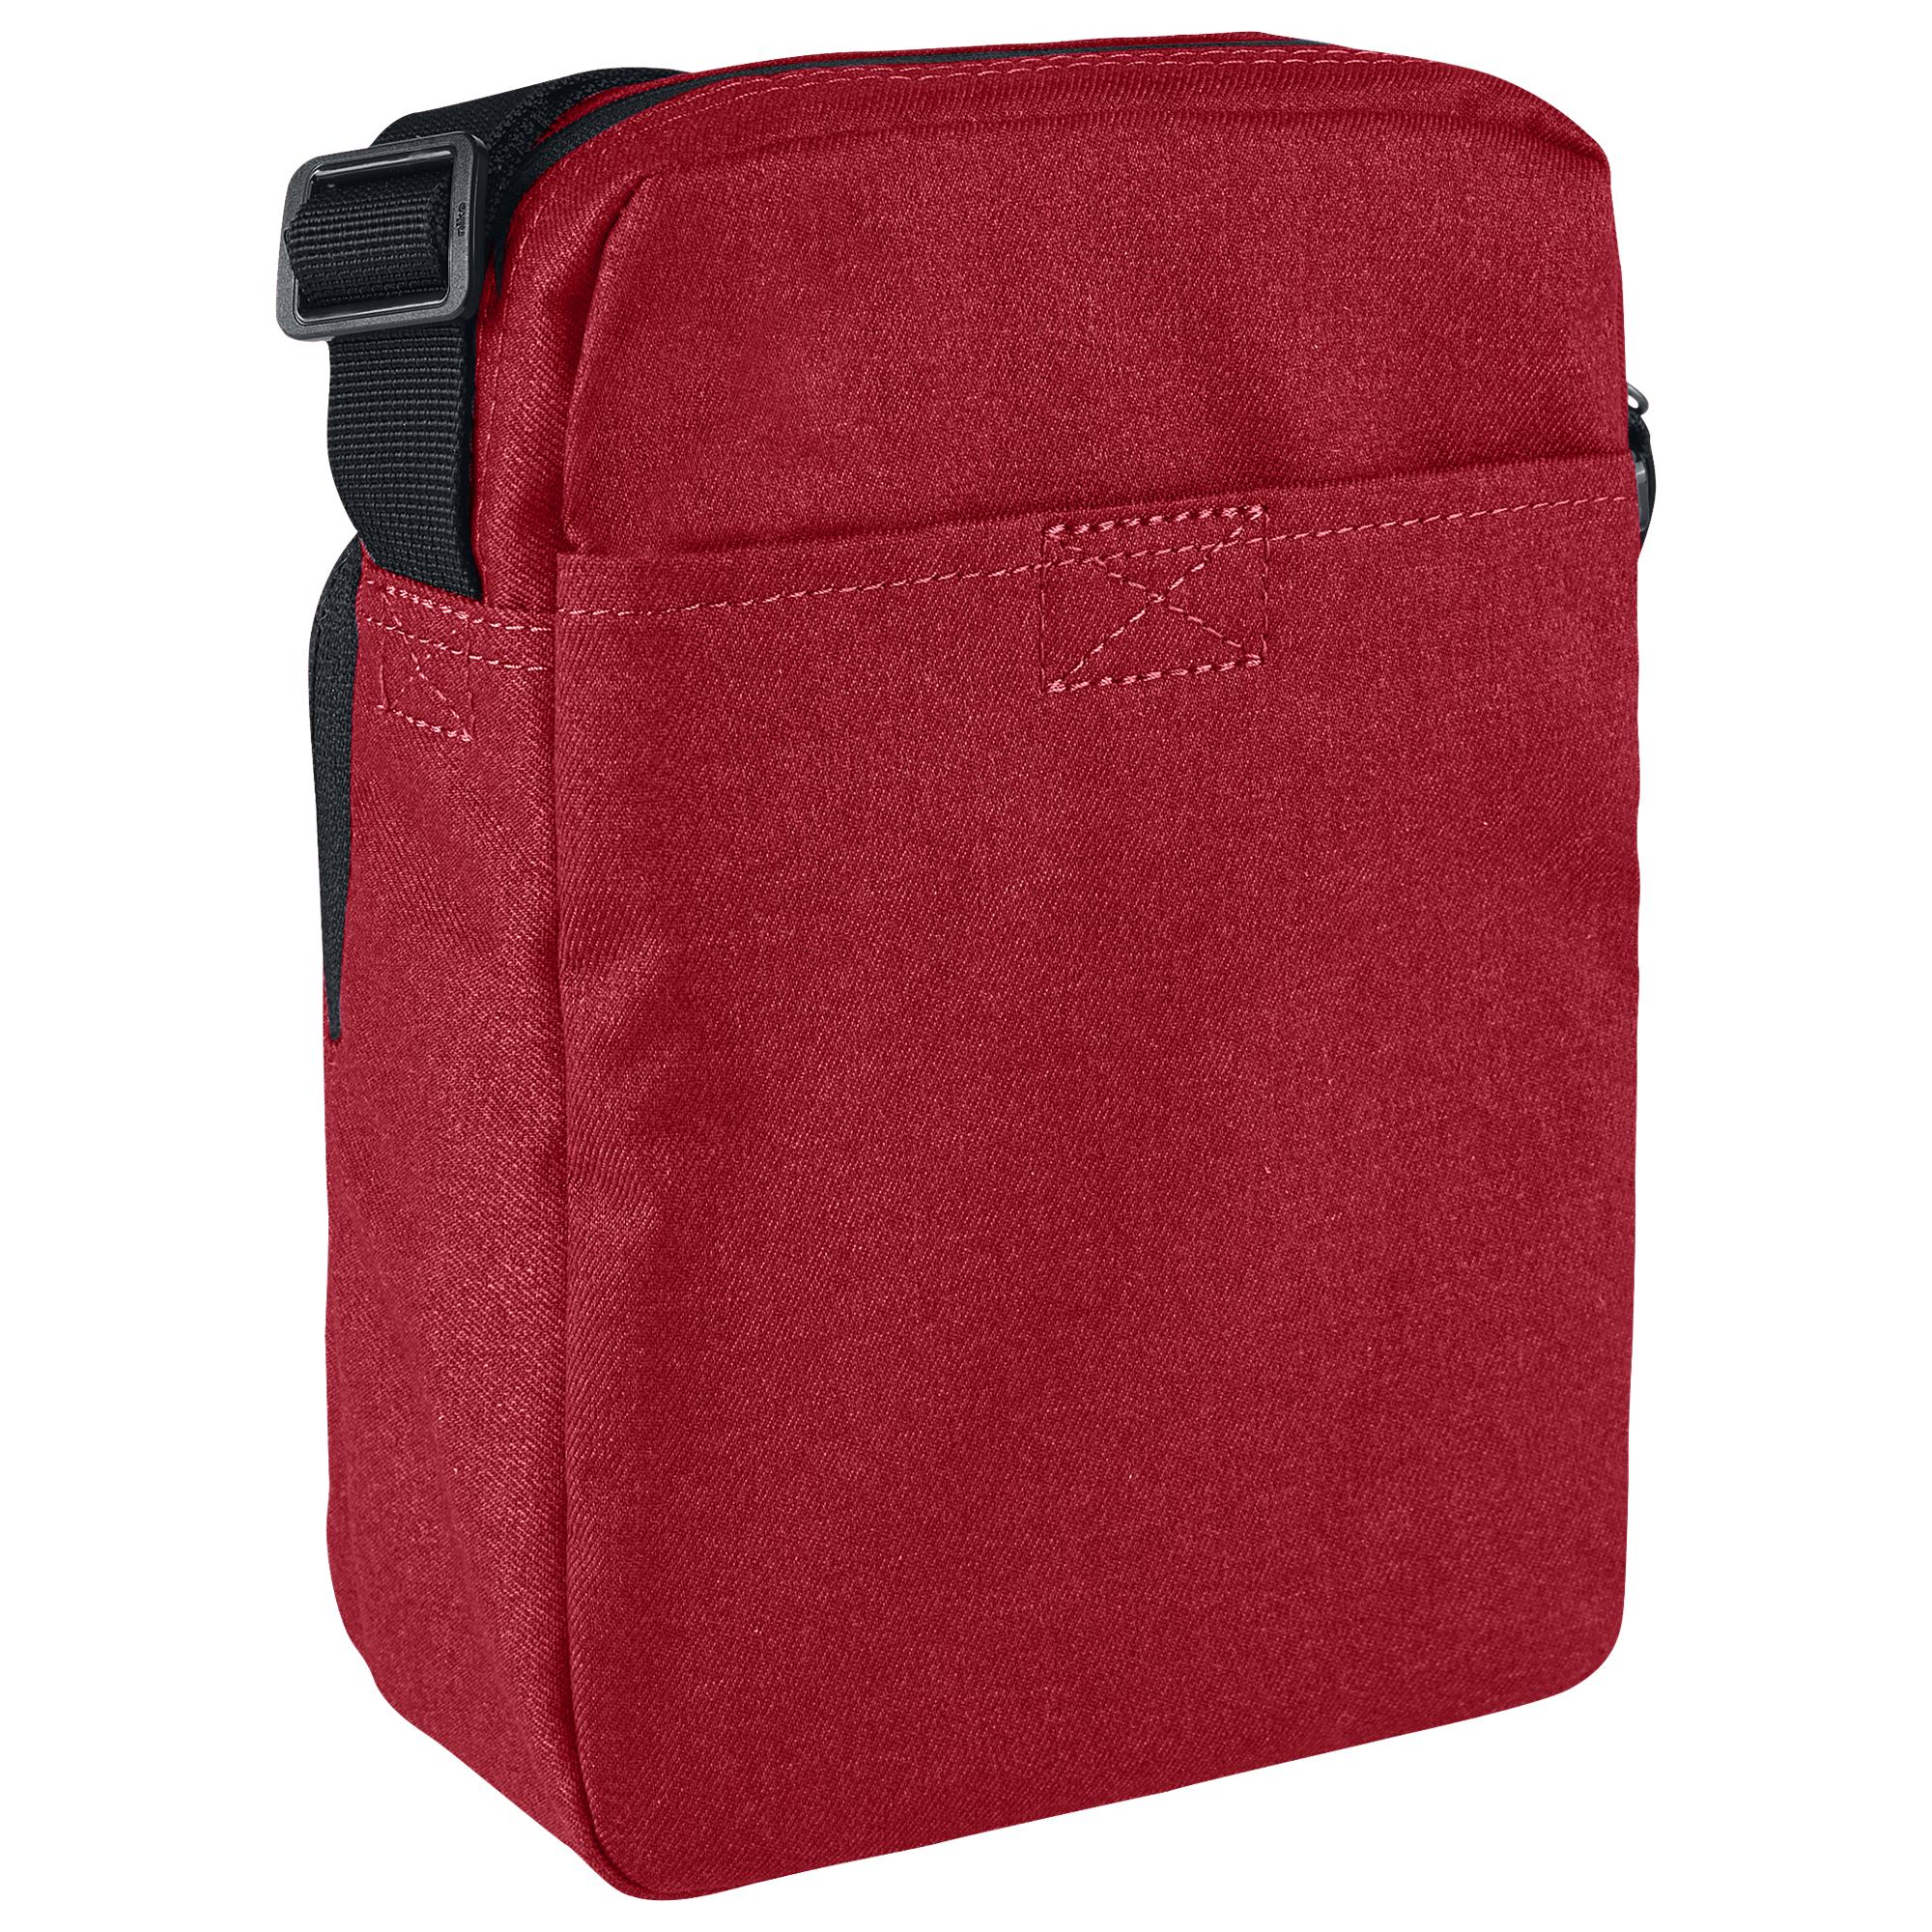 Nike Synthetic Tech Small Item Bag in Red / Black (Red) for Men - Lyst